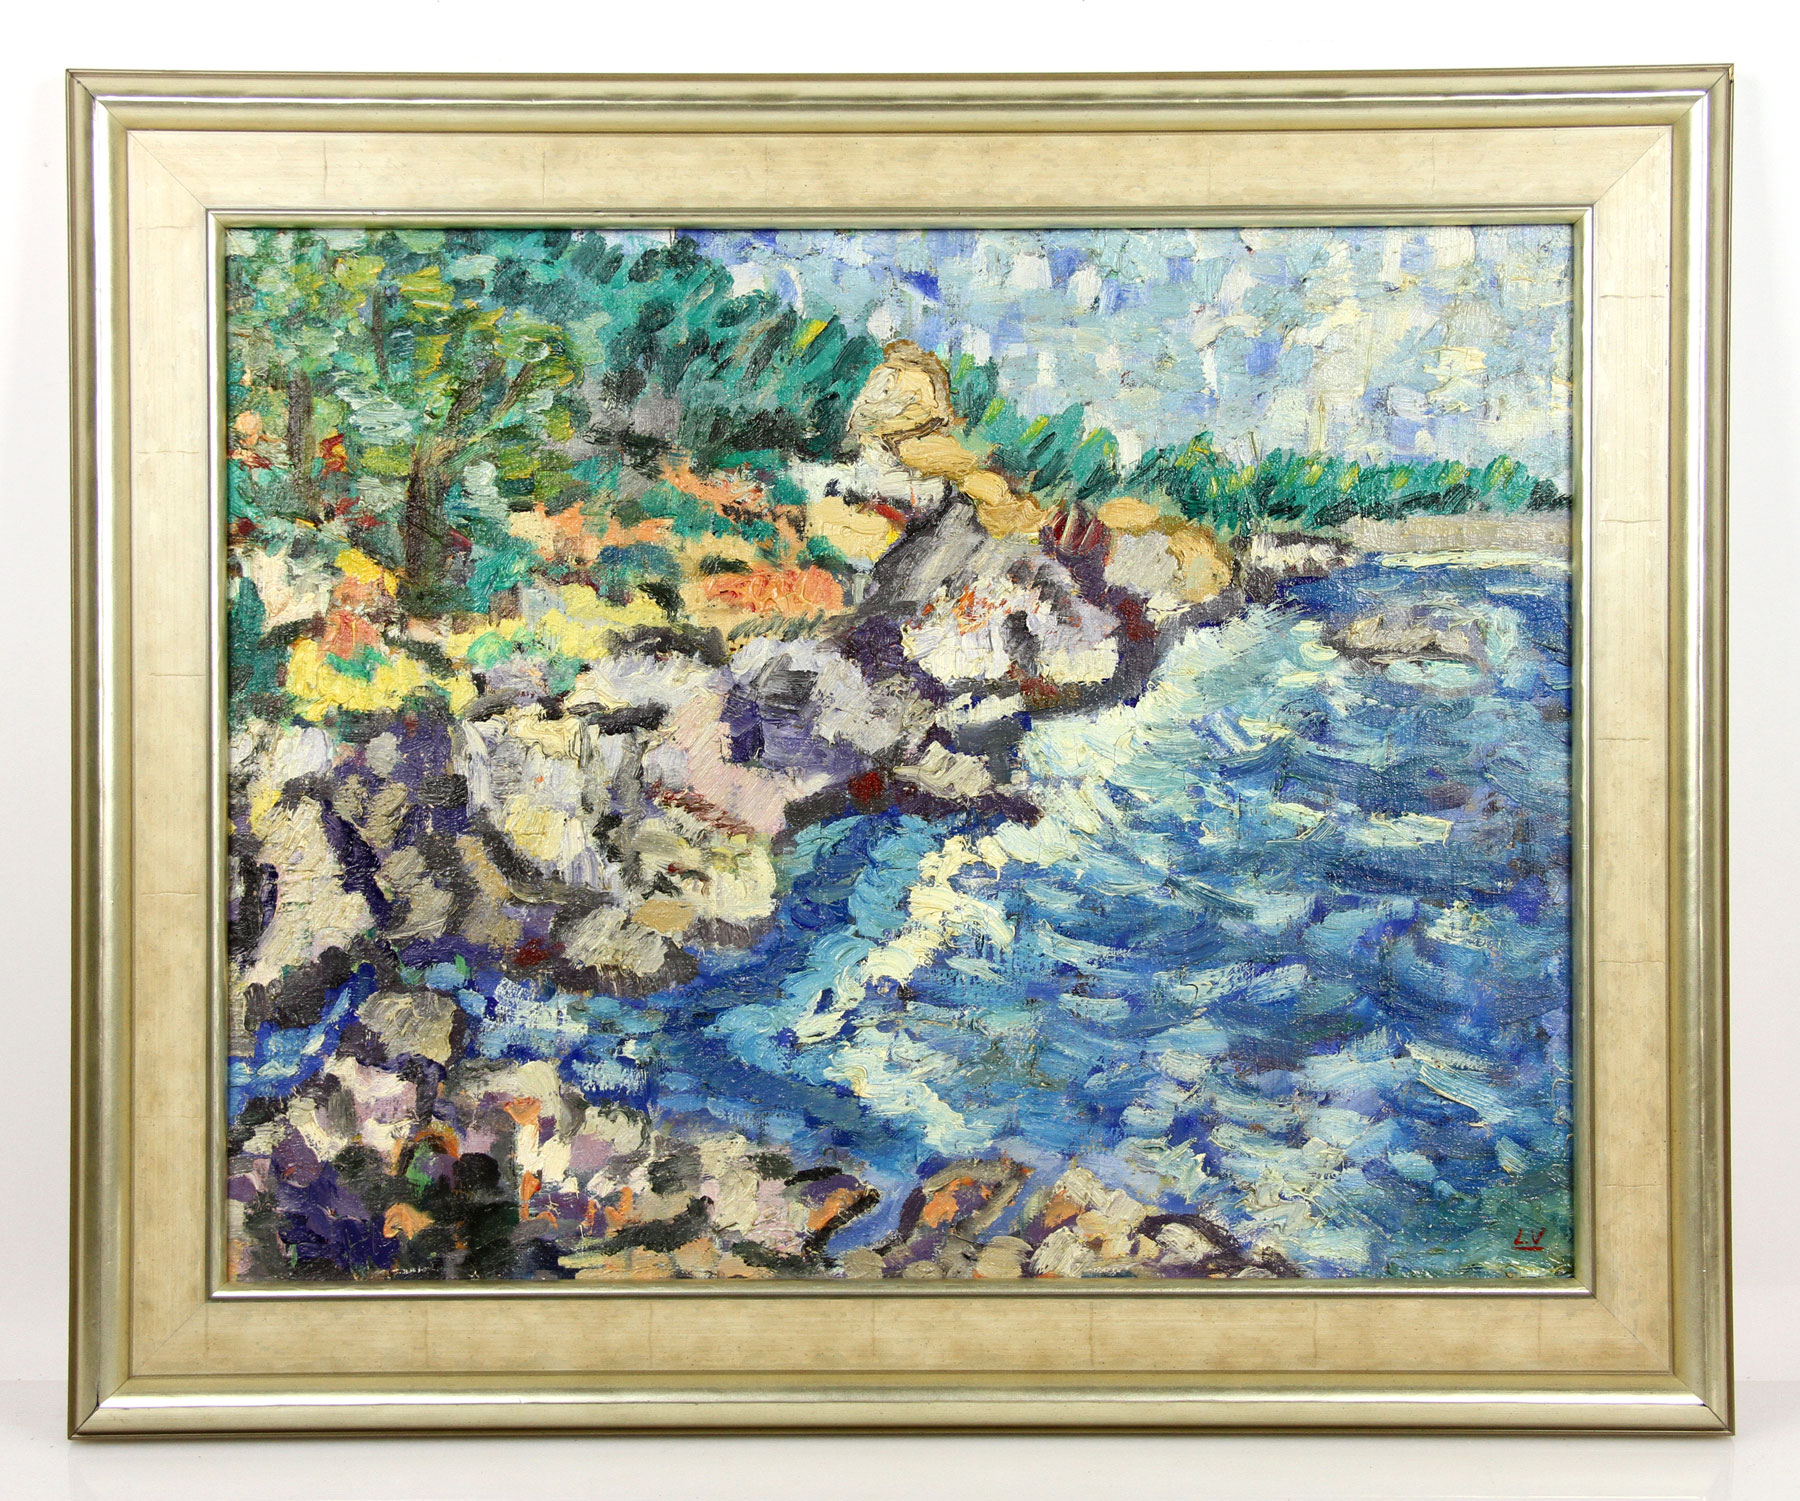 Attributed to Louis Valtat (French, 1869-1952), coastal scene, oil on canvas, initialed lower right,